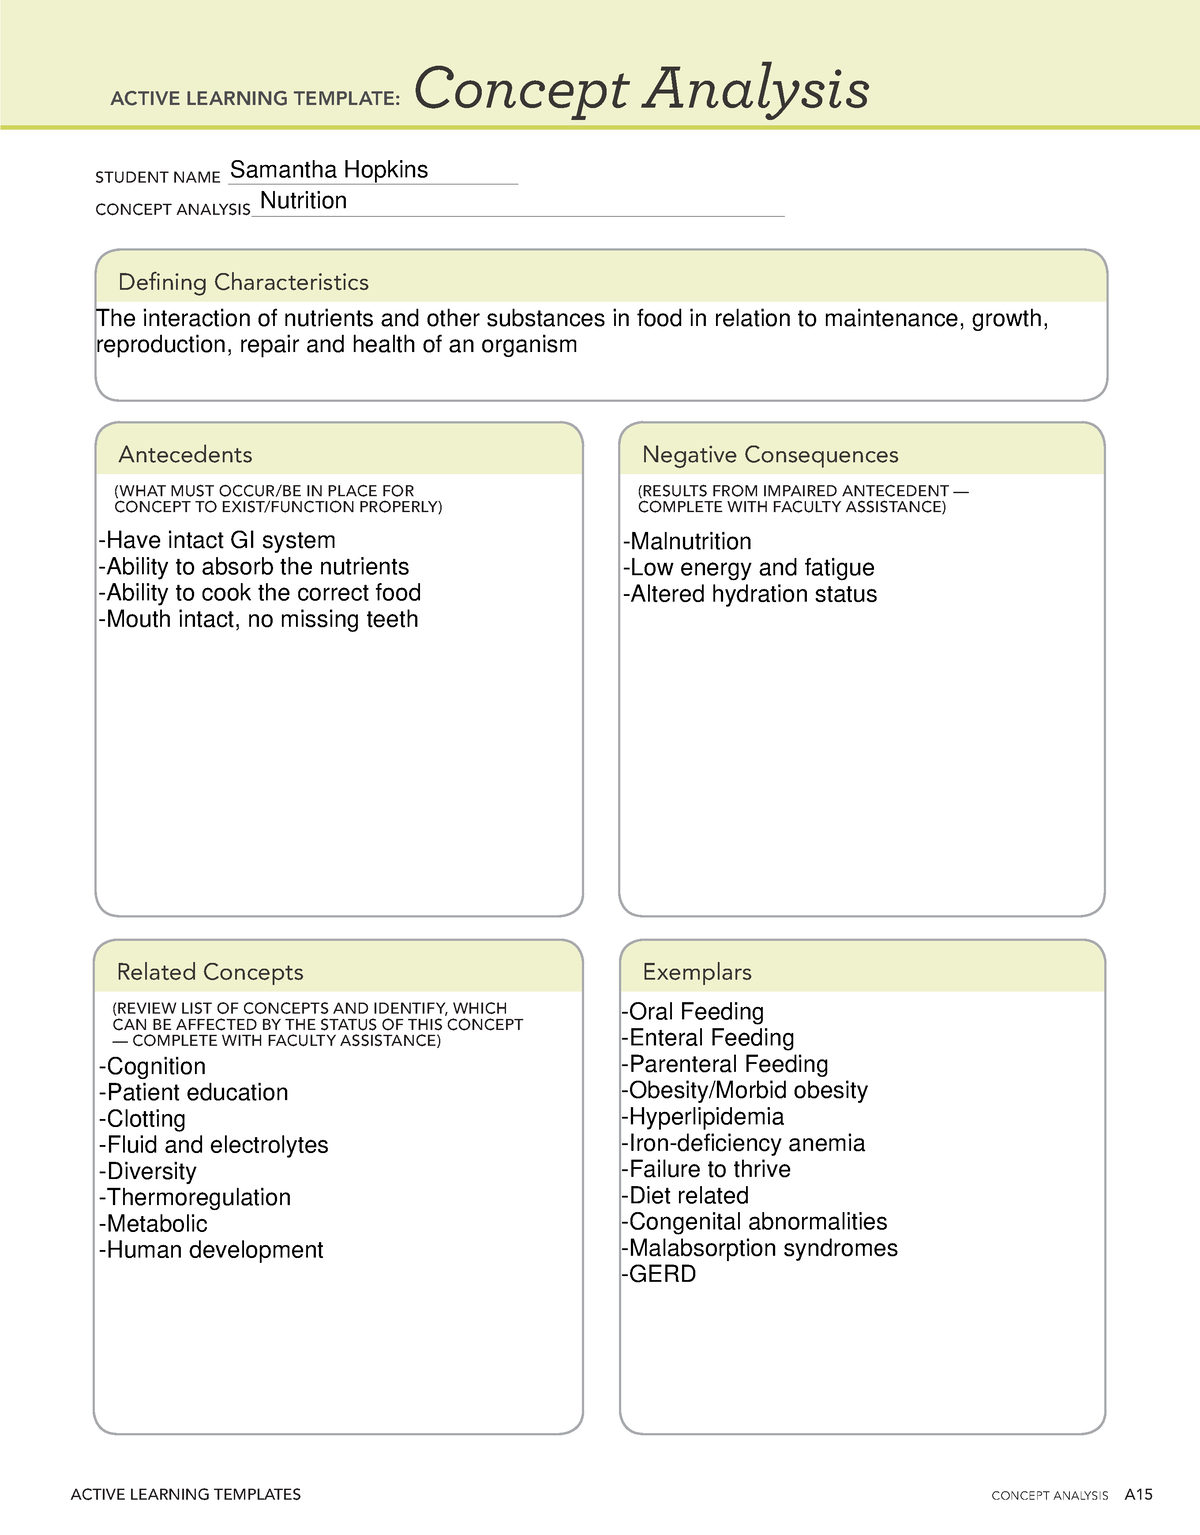 concept-analysis-2-final-active-learning-templates-concept-analysis-a-concept-analysis-student